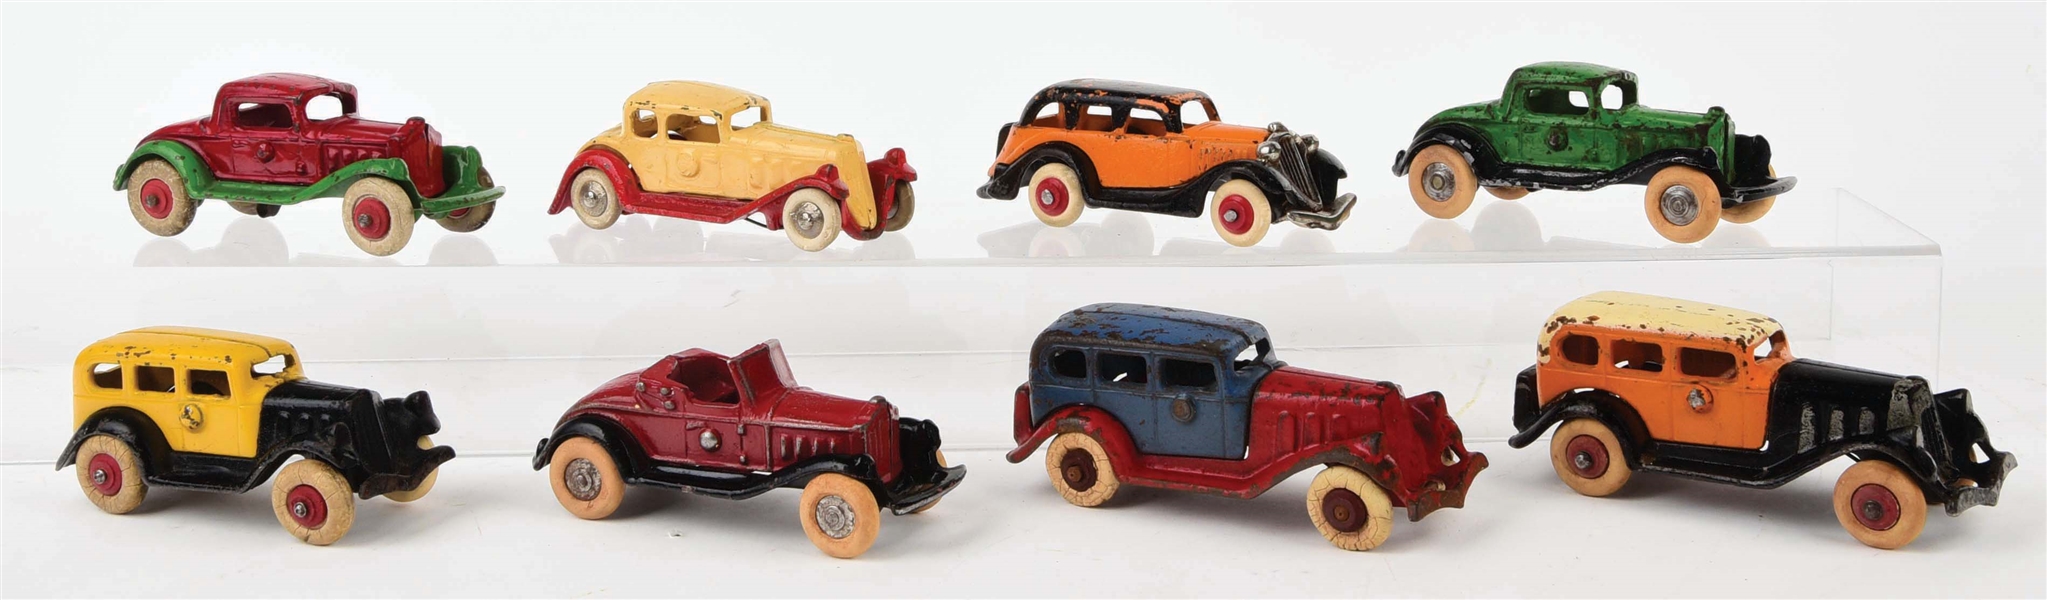 LOT OF 8: VARIOUS CAST-IRON AMERICAN MADE AUTOMOBILES.